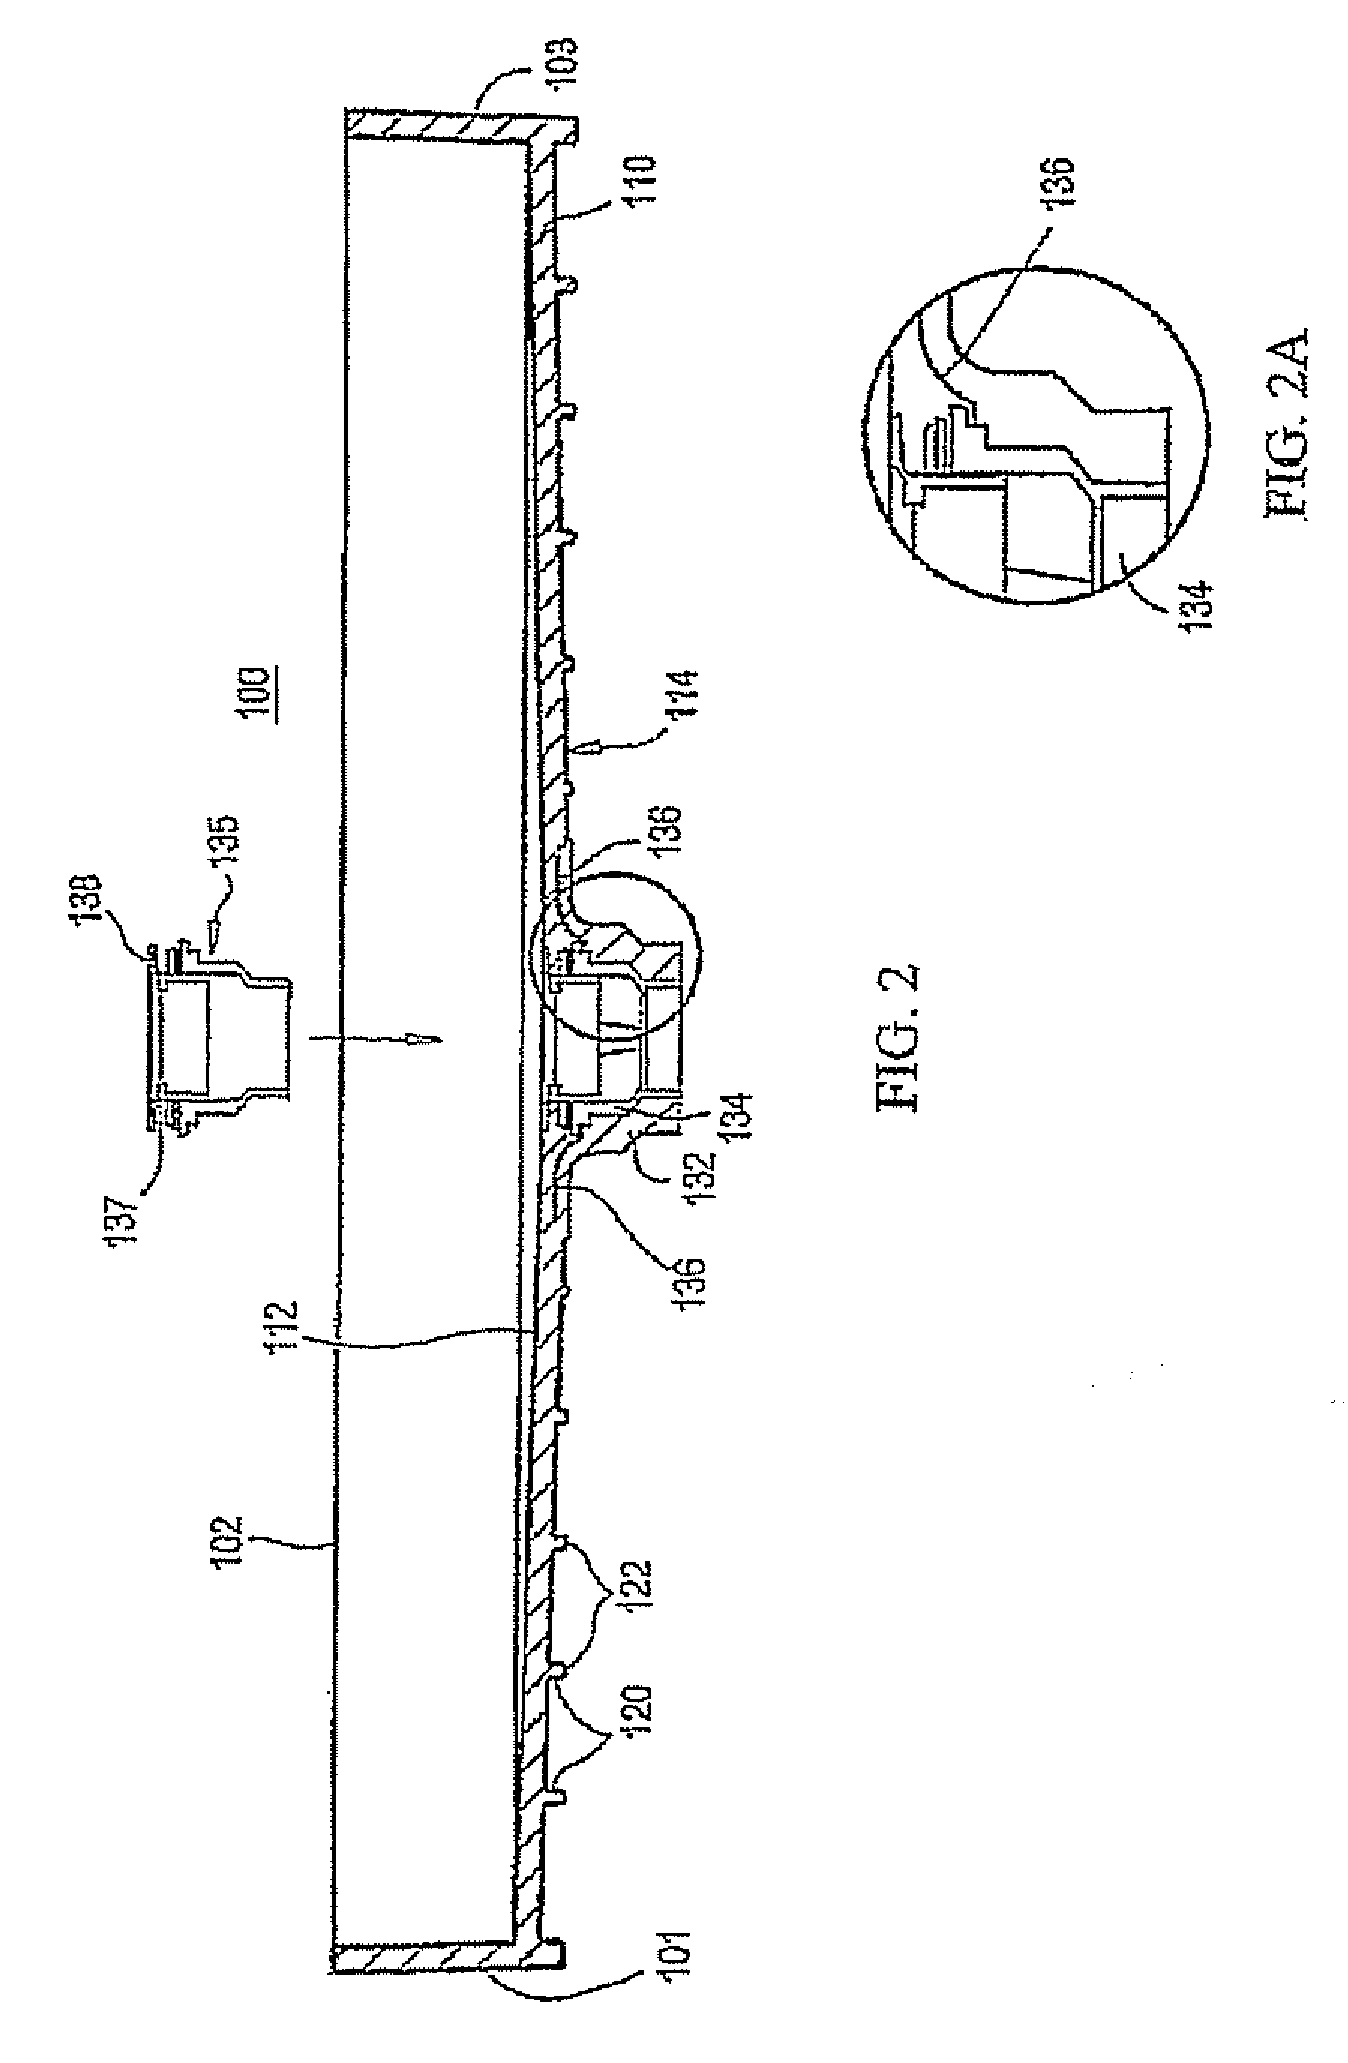 Shower enclosure design and assembly methods using prefabricated shower benches